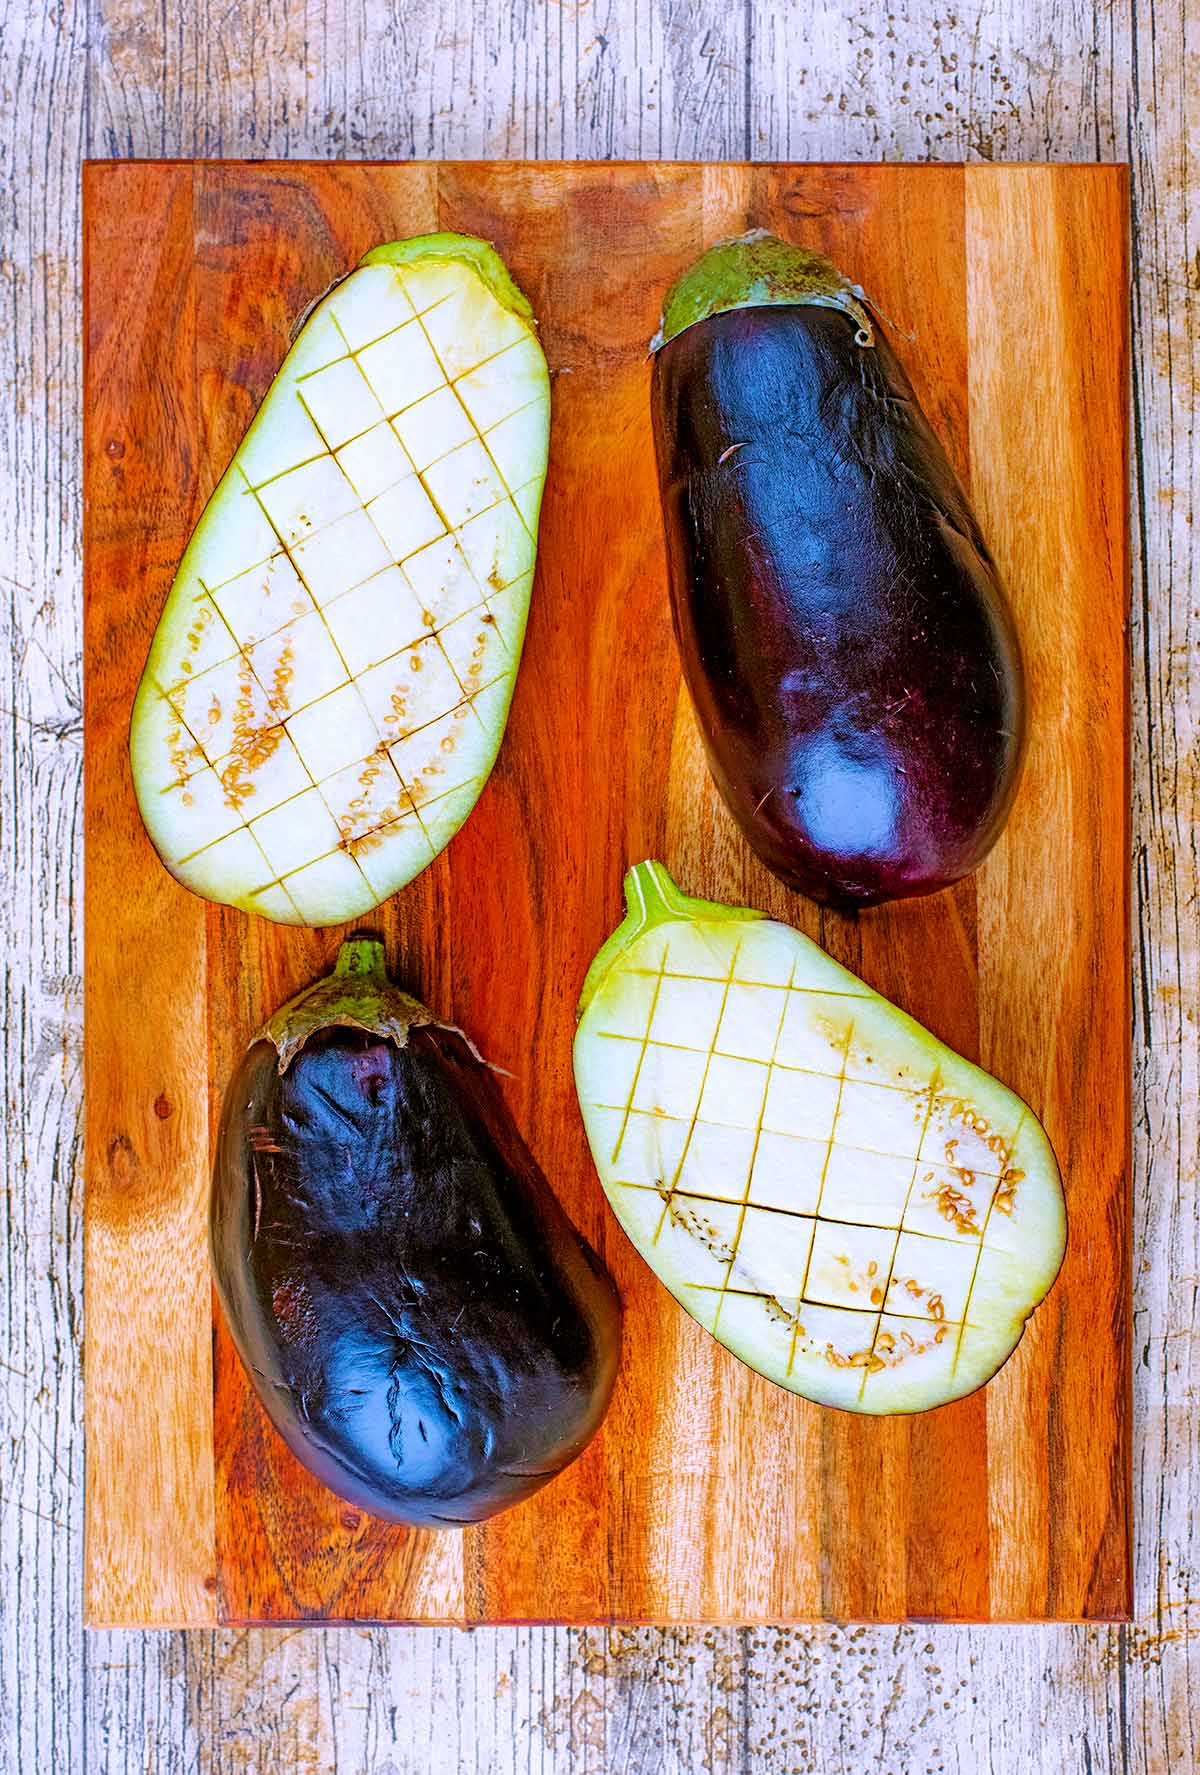 Two eggplants sliced in half and scored diagonally.